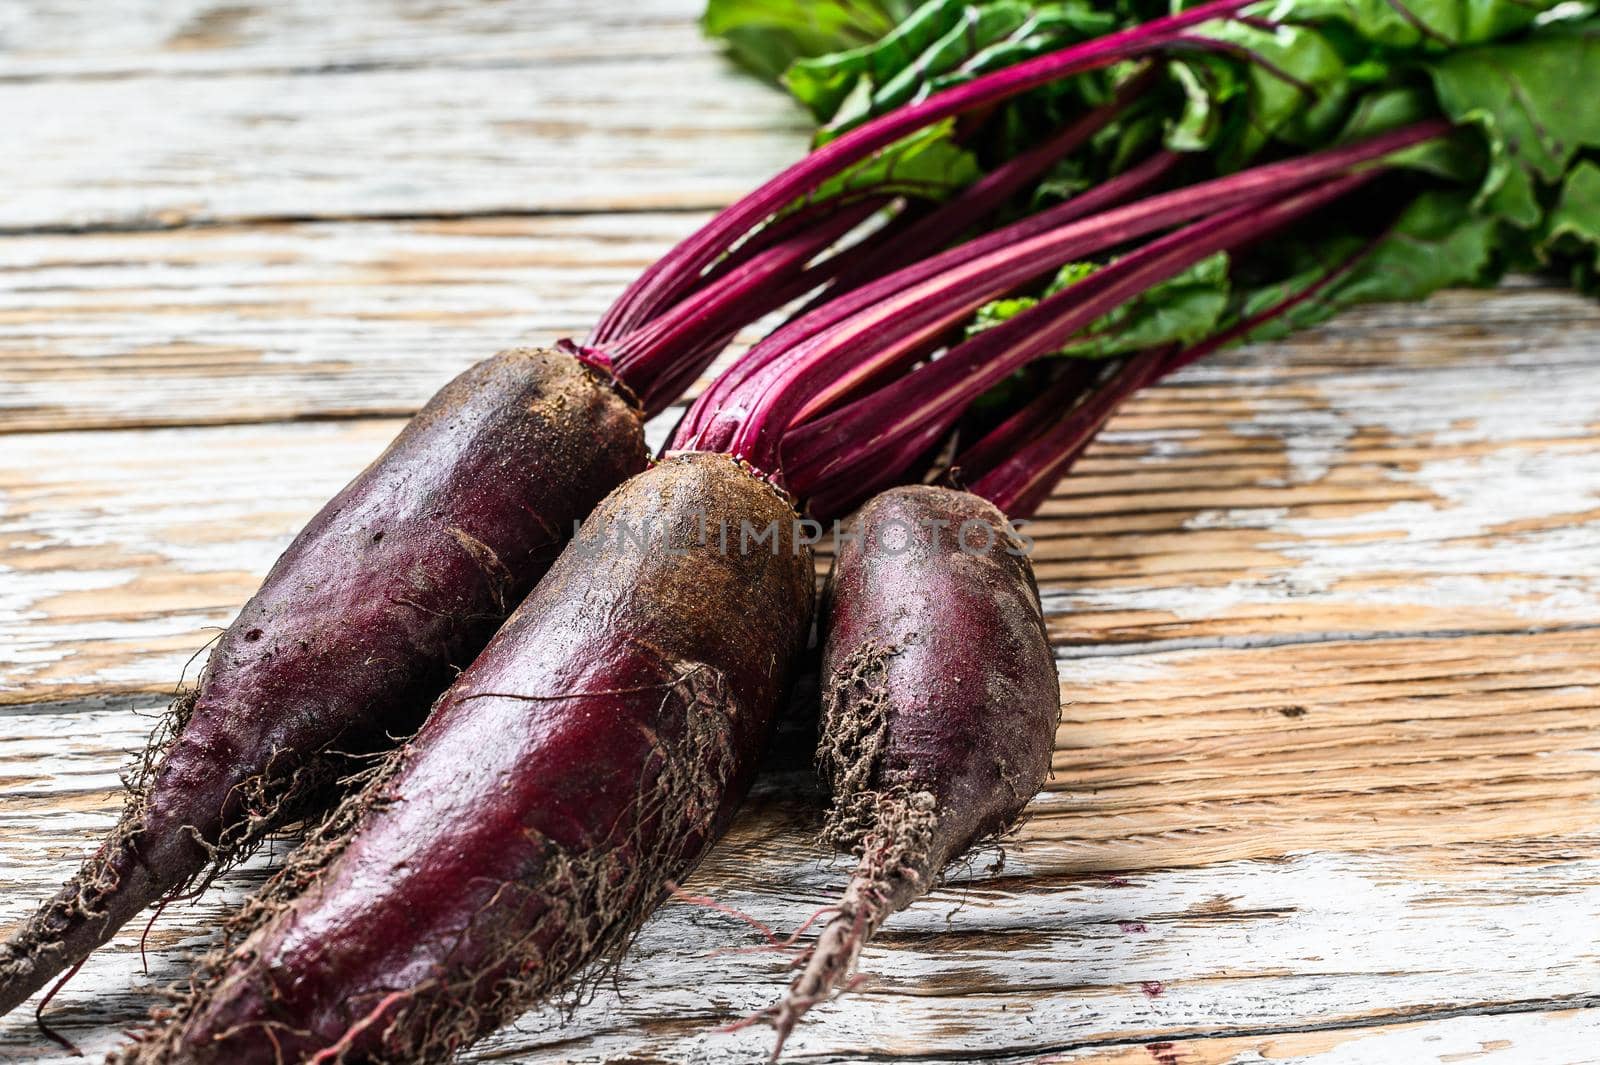 Organic purple beets. Wooden light background. Top view. Copy space by Composter